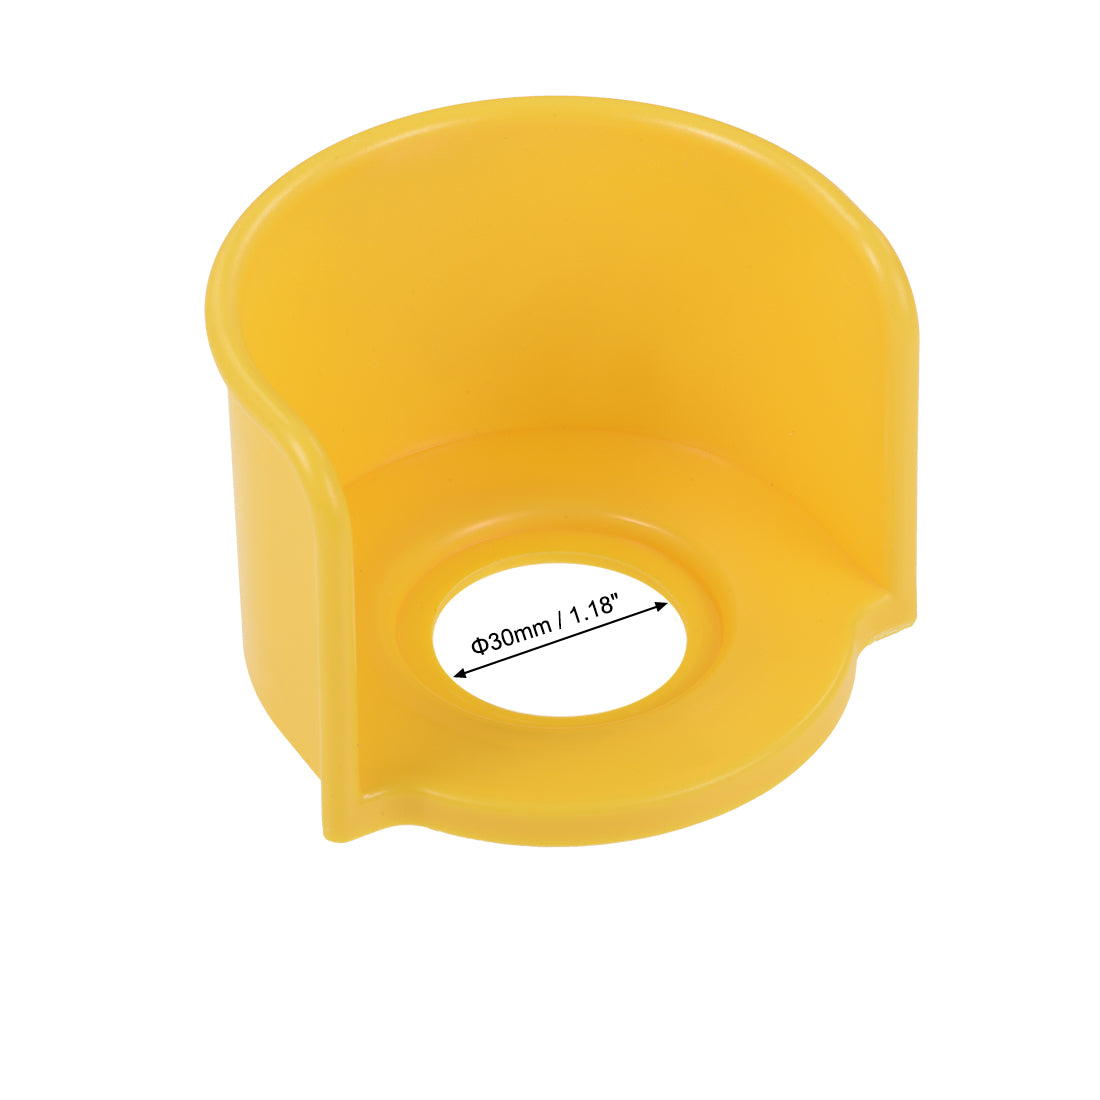 Uxcell Uxcell 30mm Plastic Half Circle Emergency Stop Switch Push Button Protective Cover Yellow  72x72x48mm